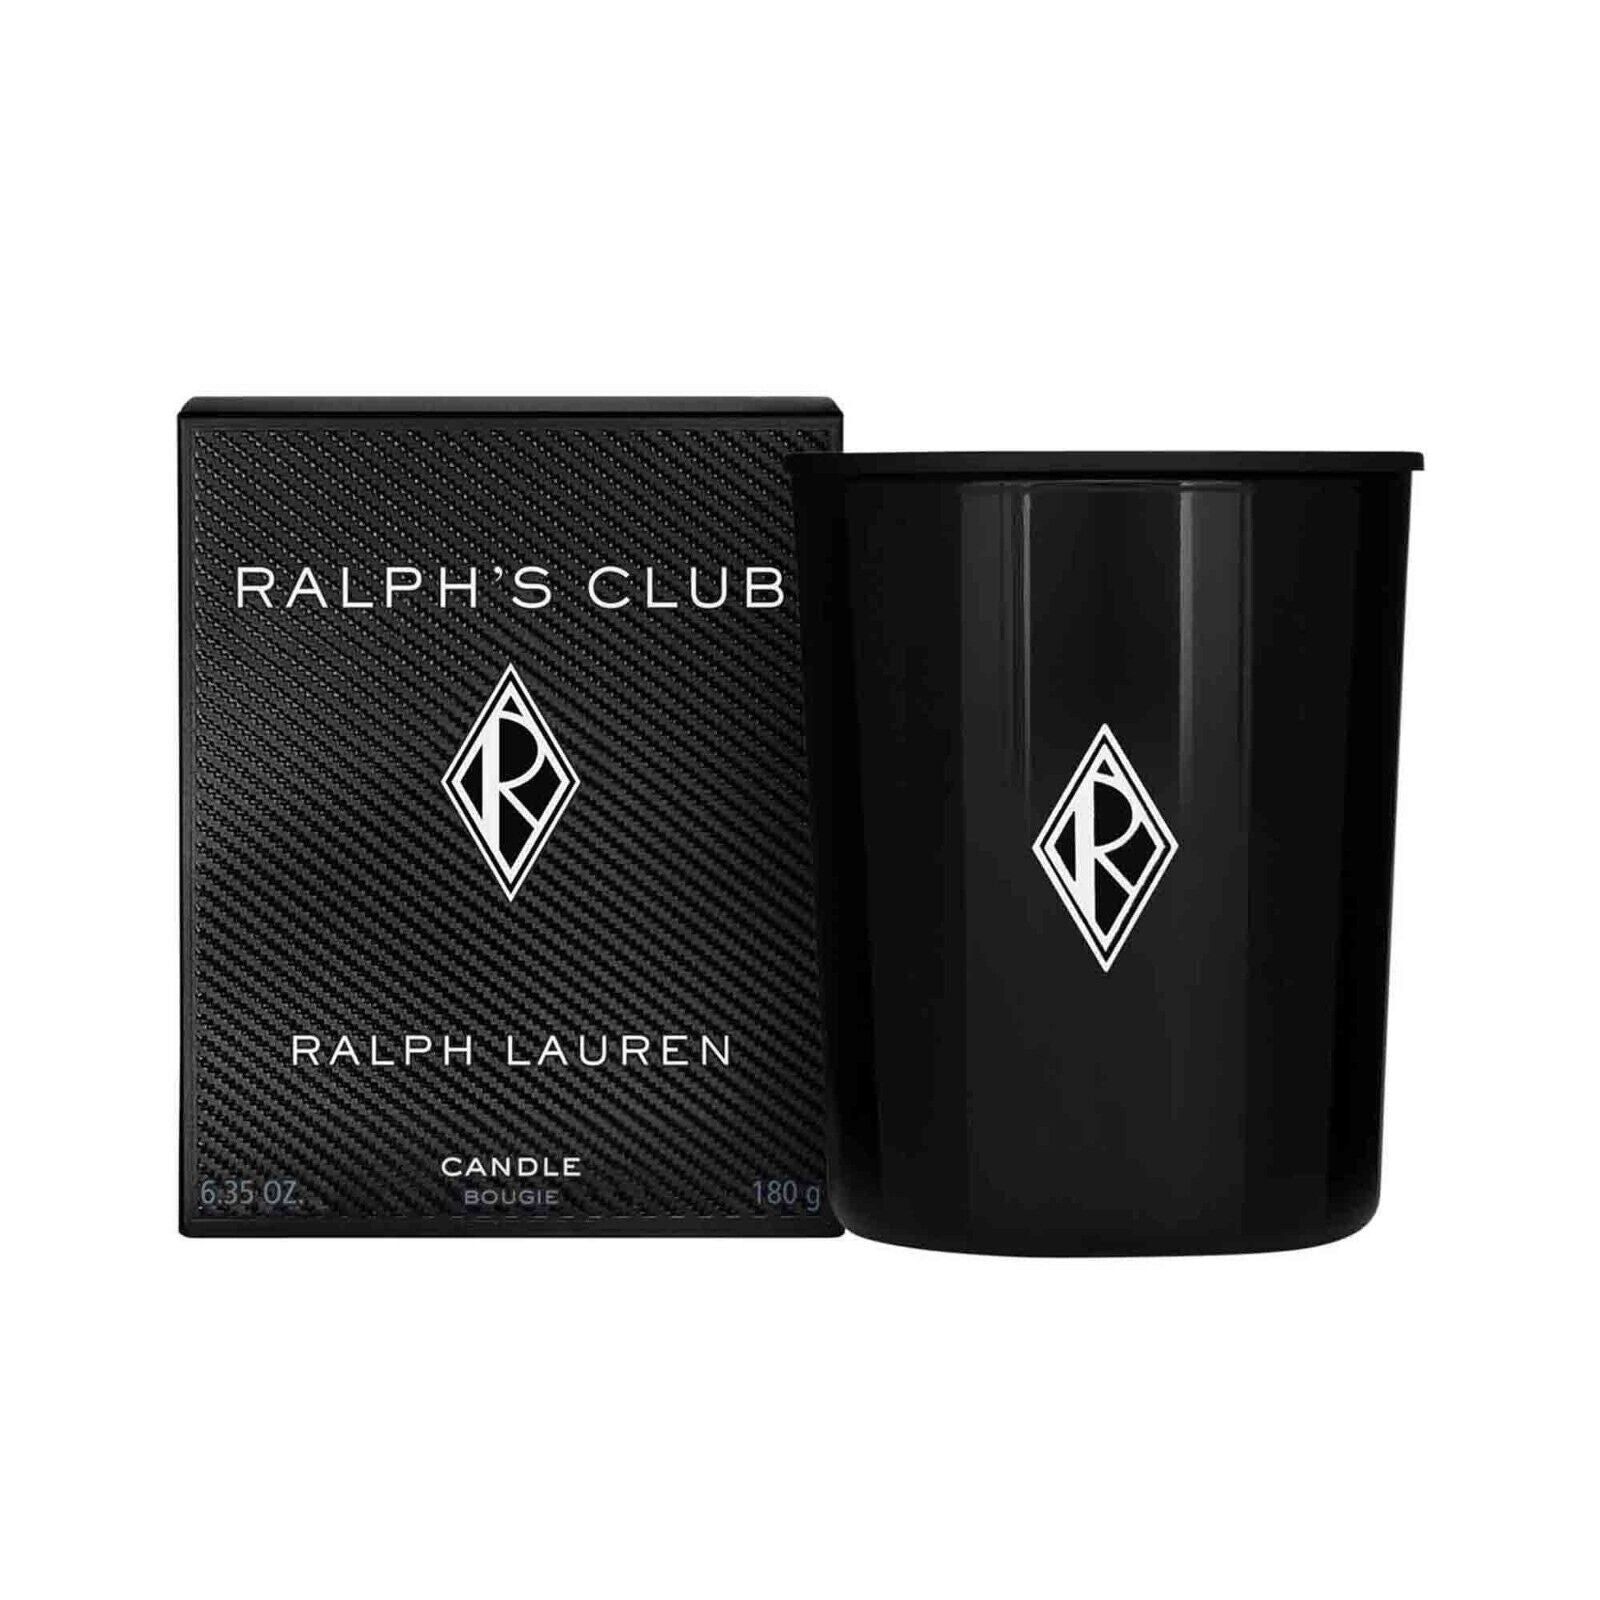 Ralph Lauren Ralph's Club Scented Candle 180 G